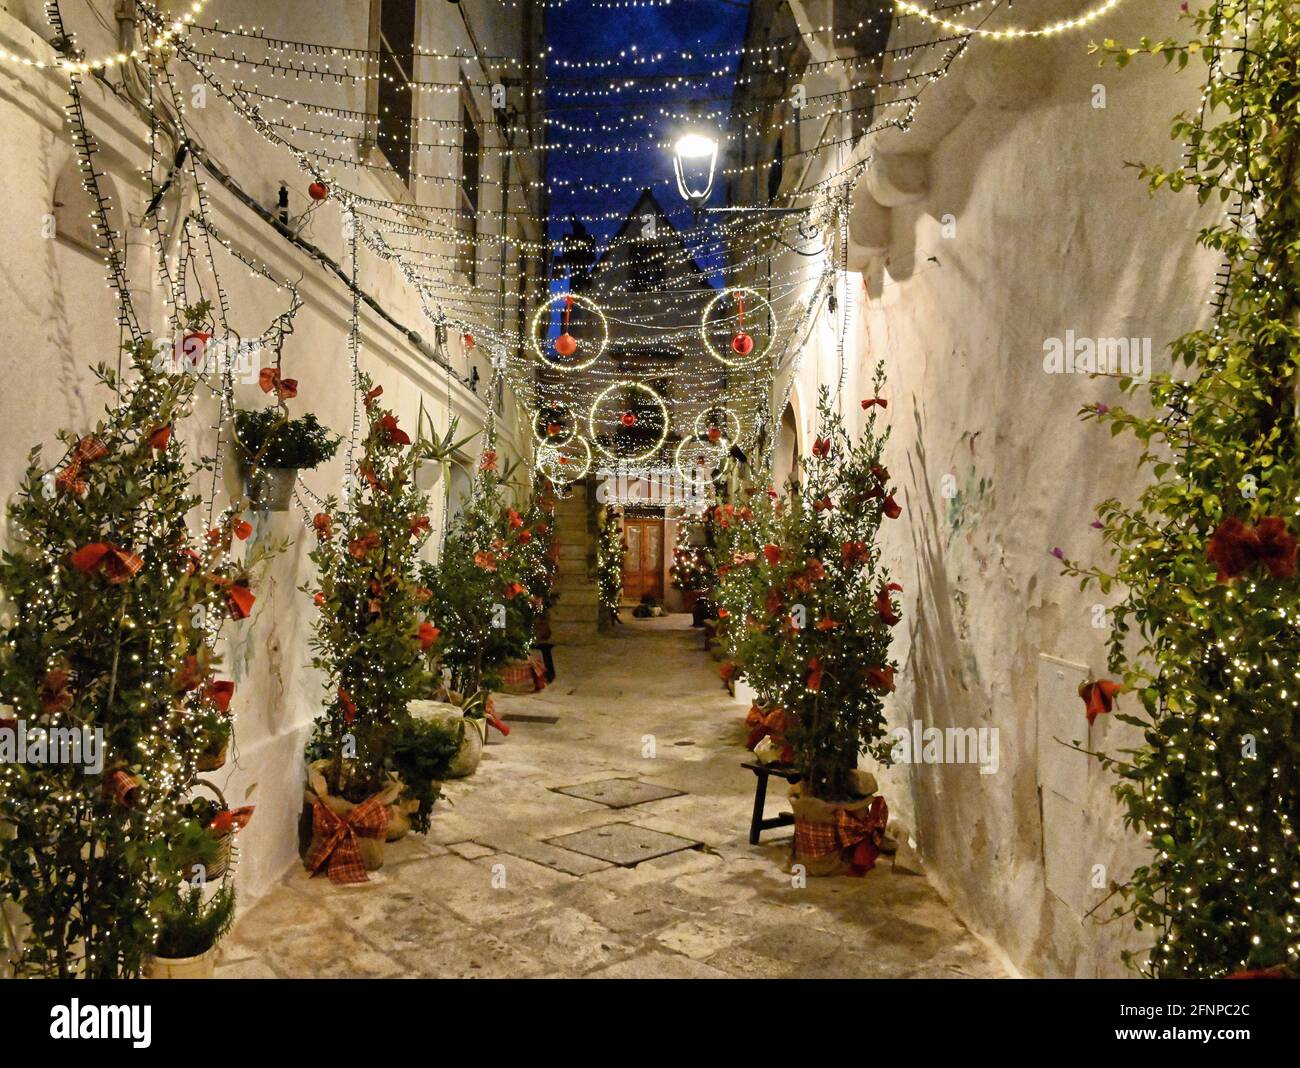 Christmas decorations in the Old Town, Locorotondo, Italy Stock Photo